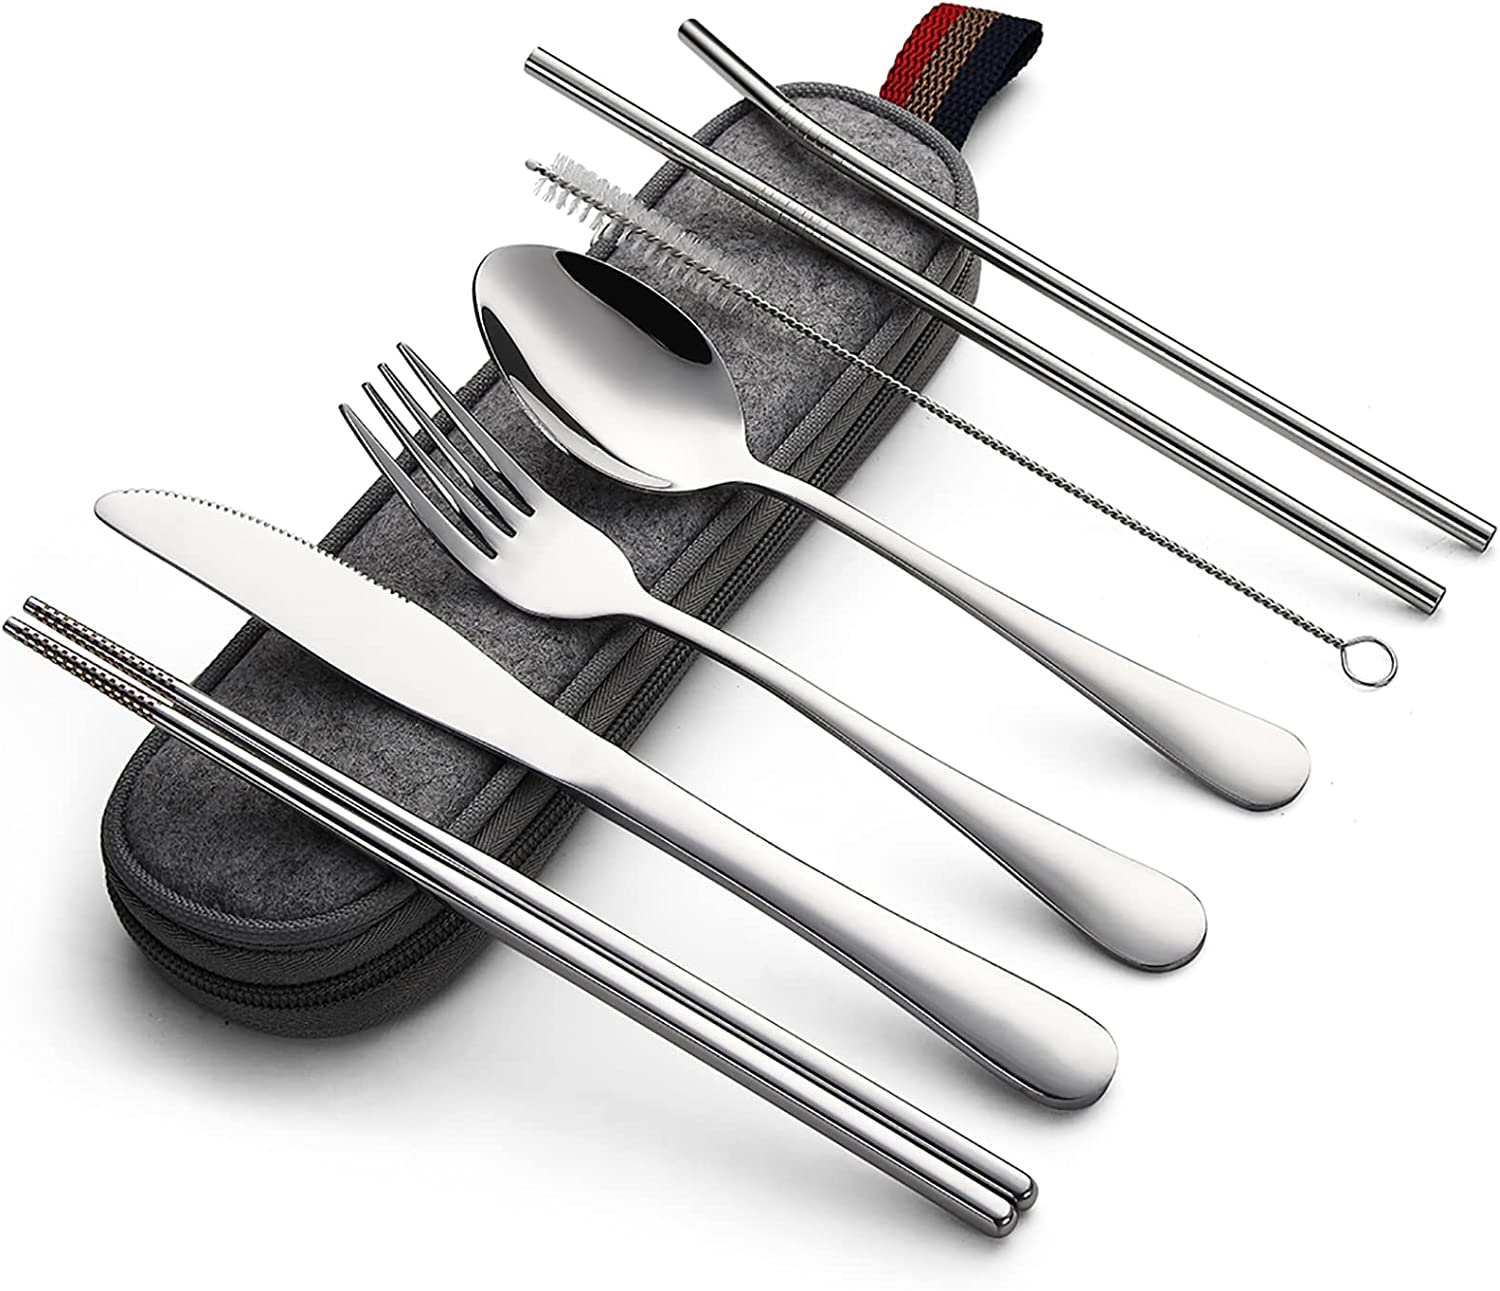  2 Pcs camping flatware forky kit stainless steel silverware  portable utensil kit camping utensils camping cutlery tool durable picnic  utensil camping foldable fork folding spoon : Sports & Outdoors